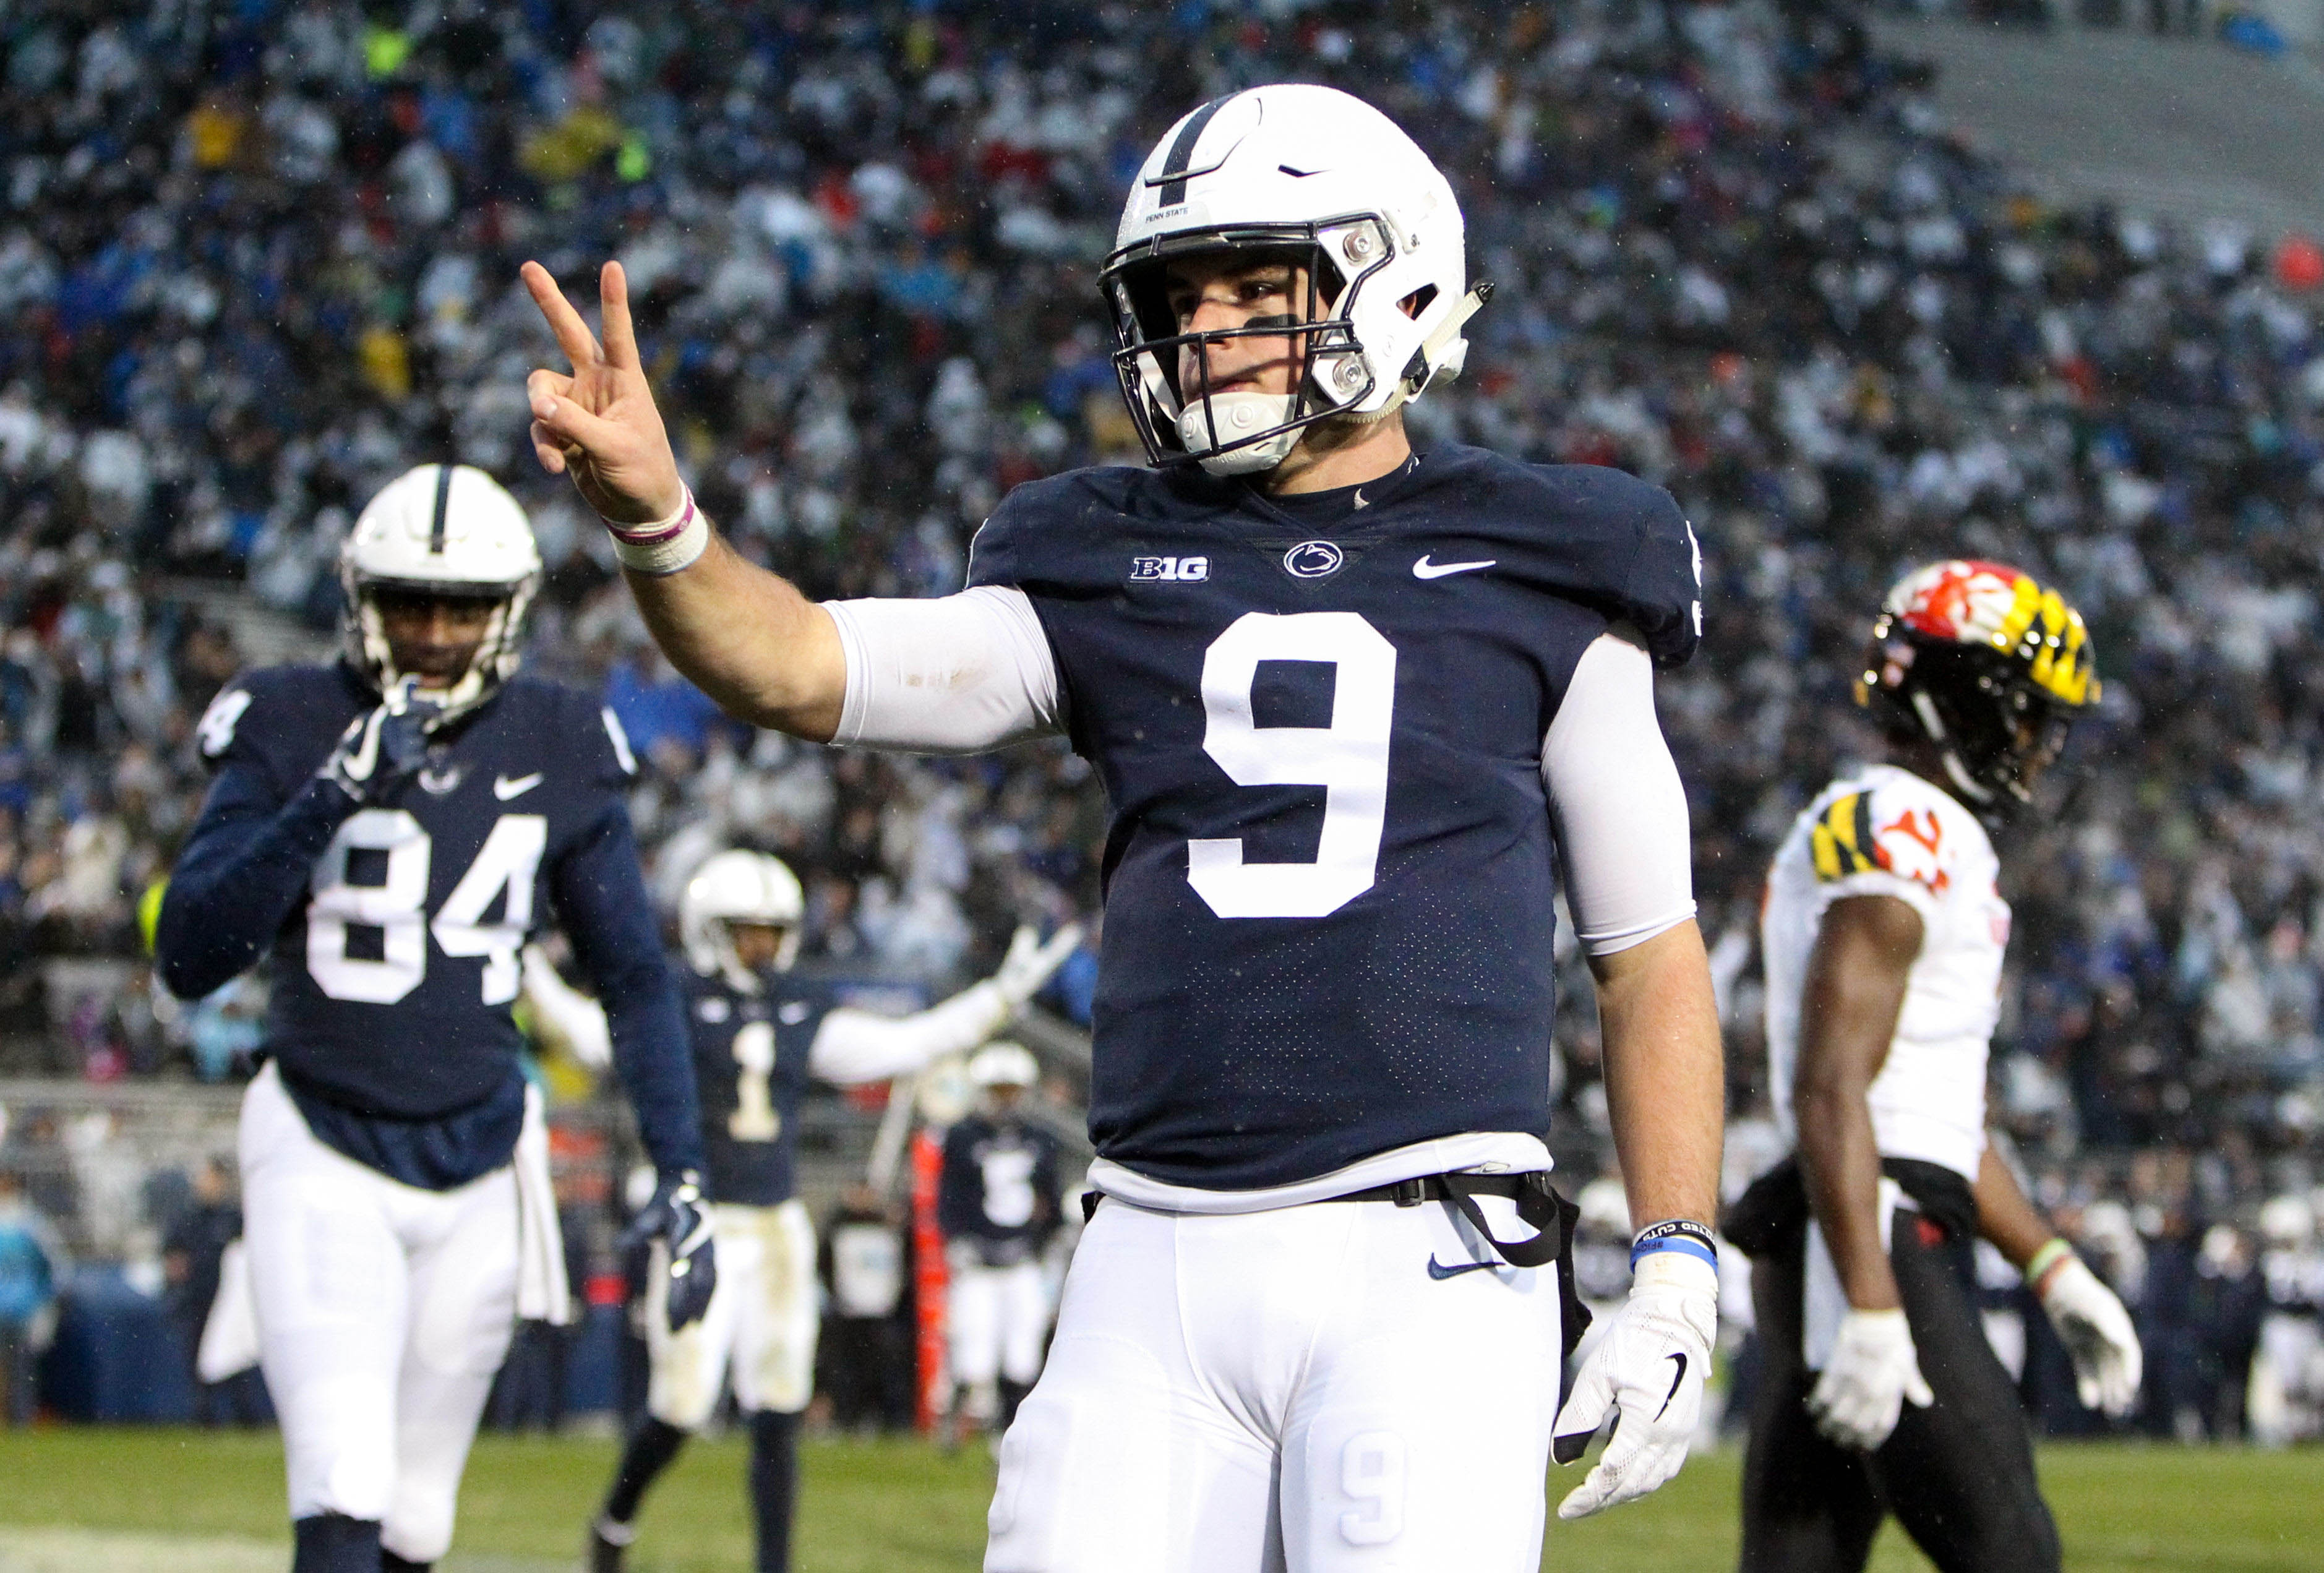 Two most likely bowl destinations for Penn State